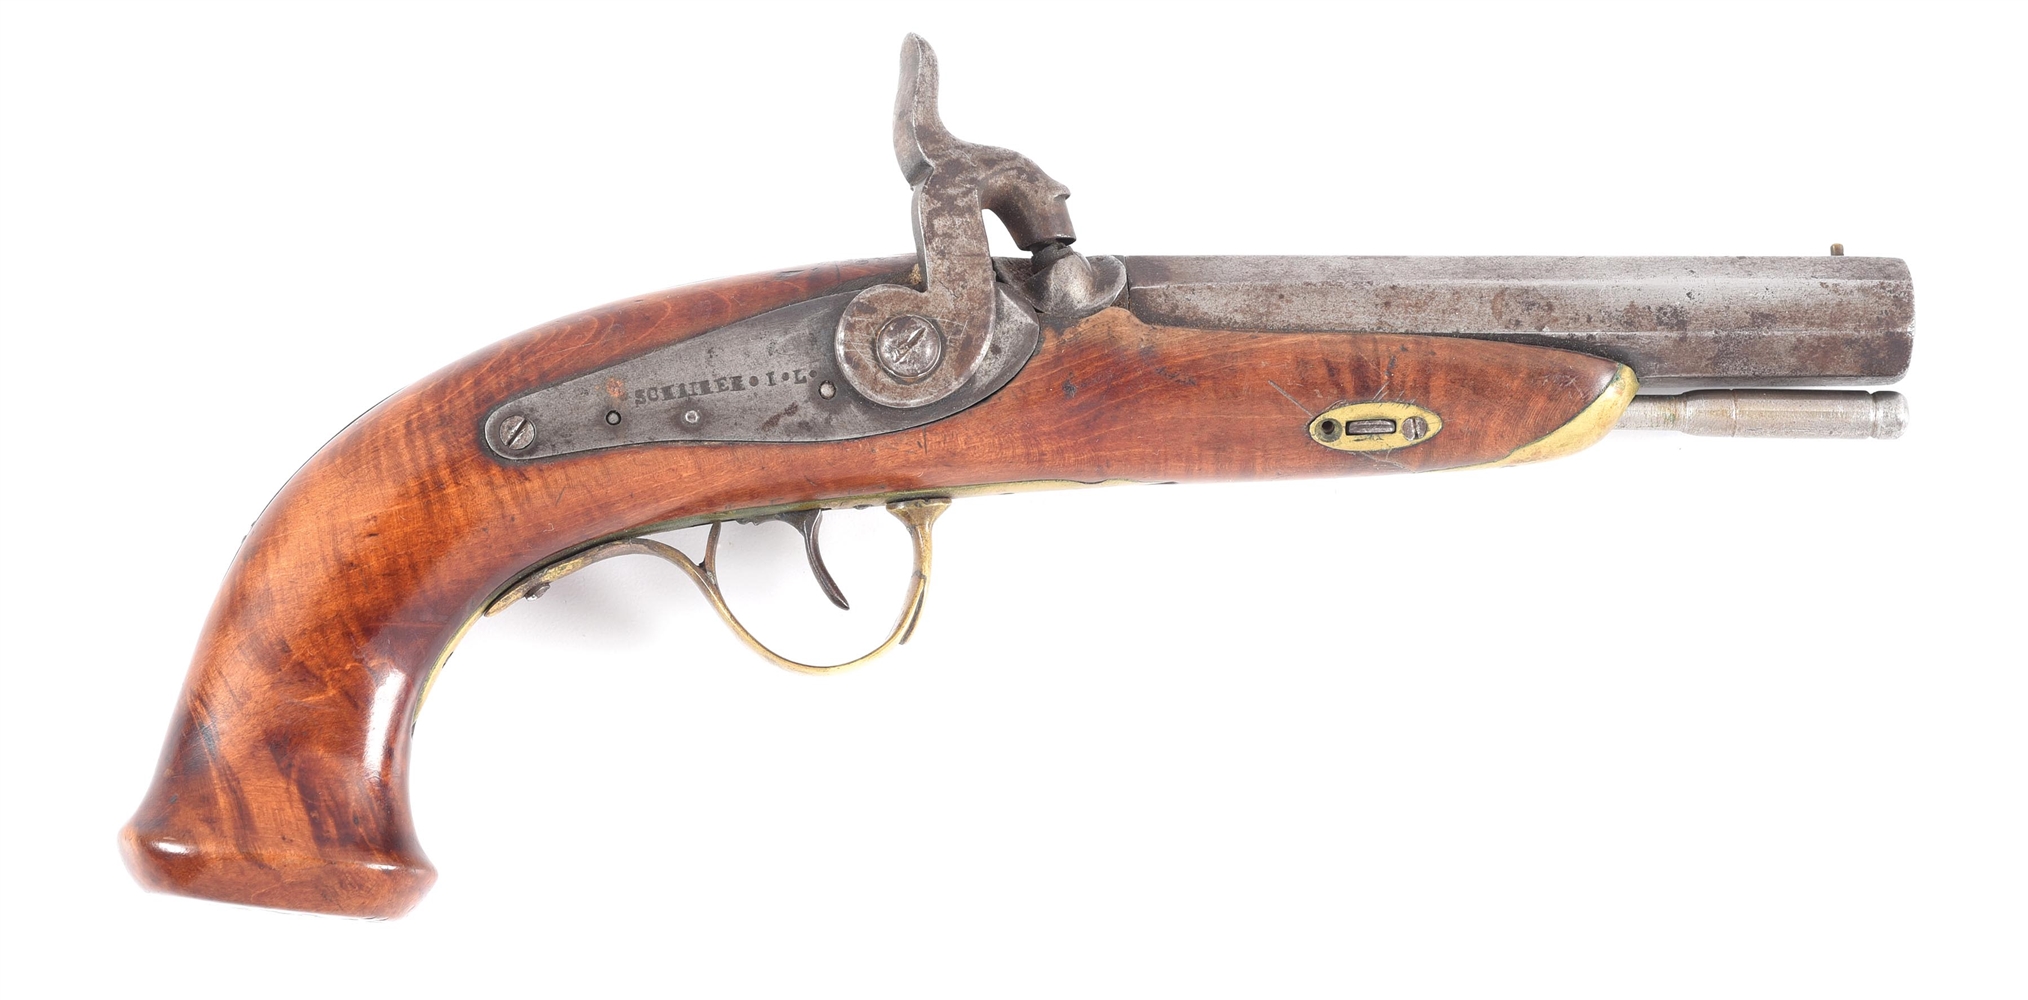 (A) WESTERN PENNSYLVANIA PERCUSSION PISTOL BY SCHAIRER.